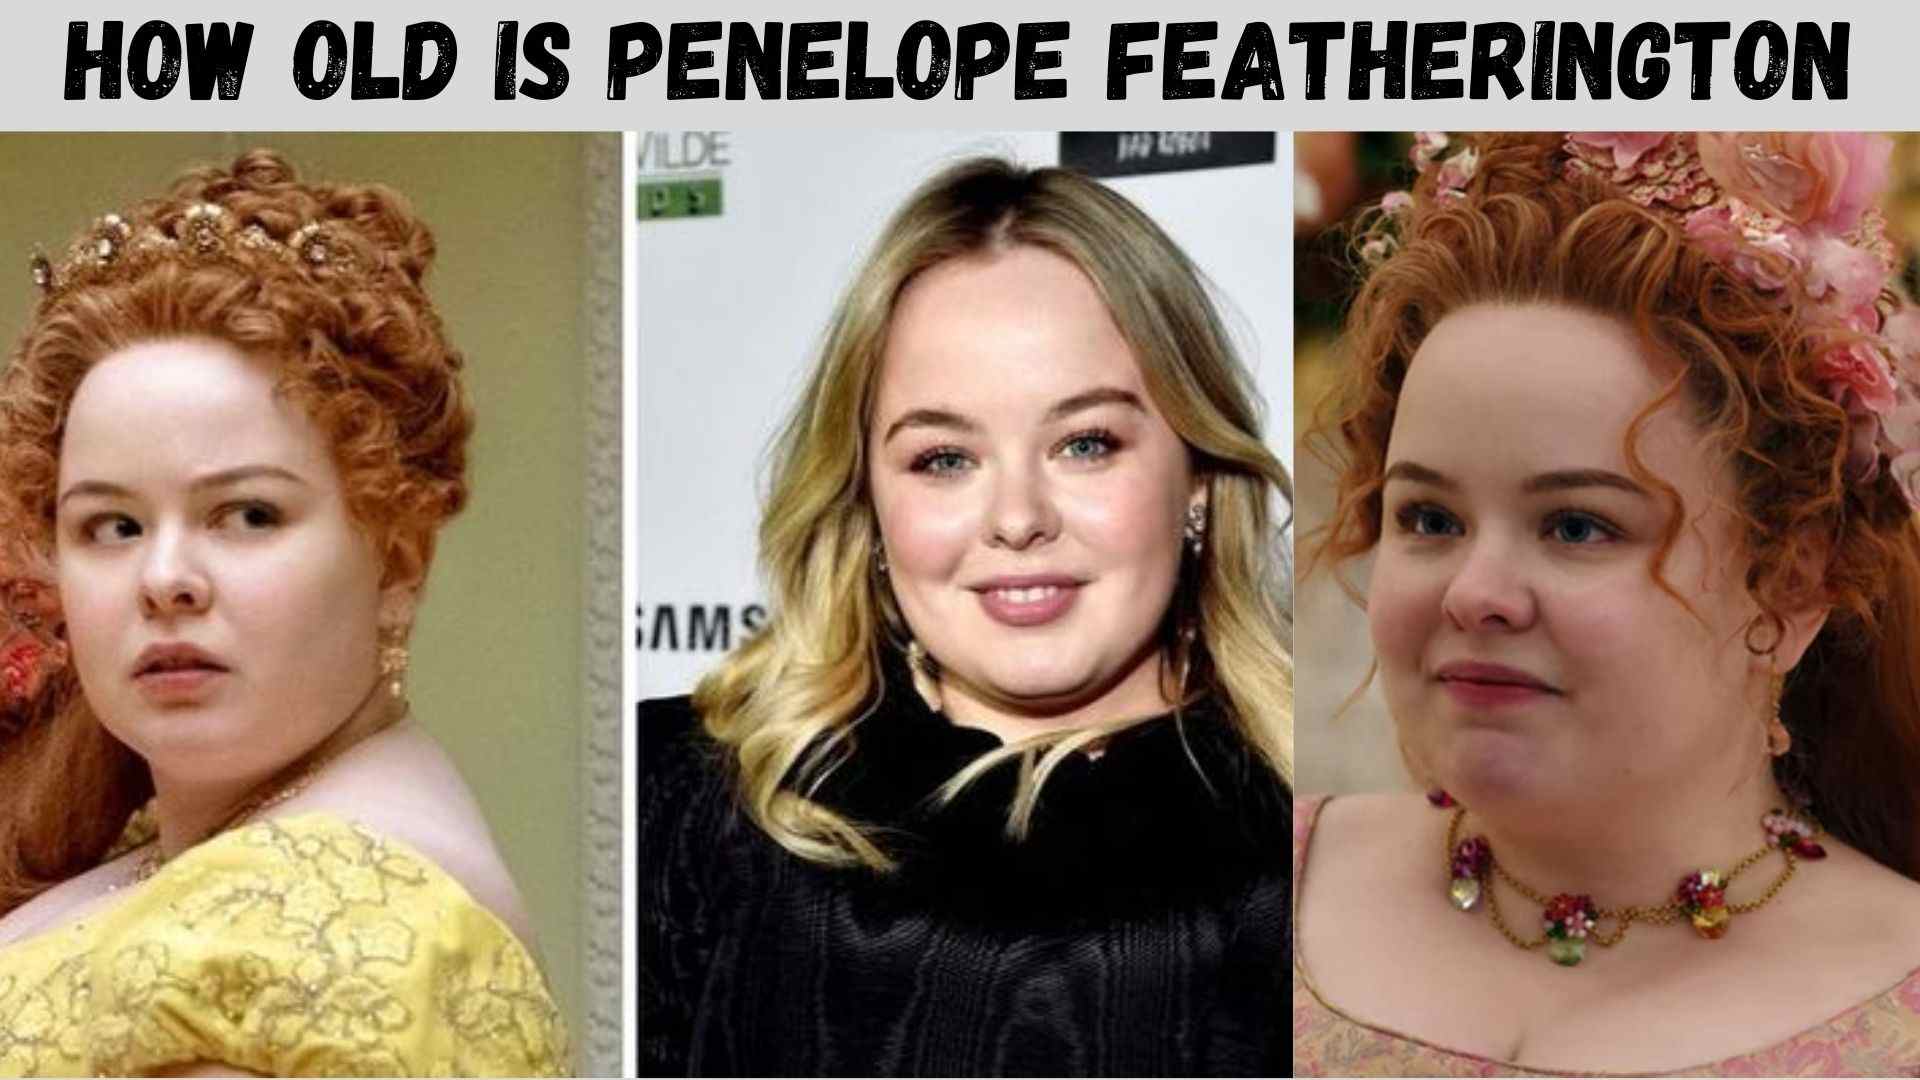 How old is Penelope Featherington Wallpaper and images